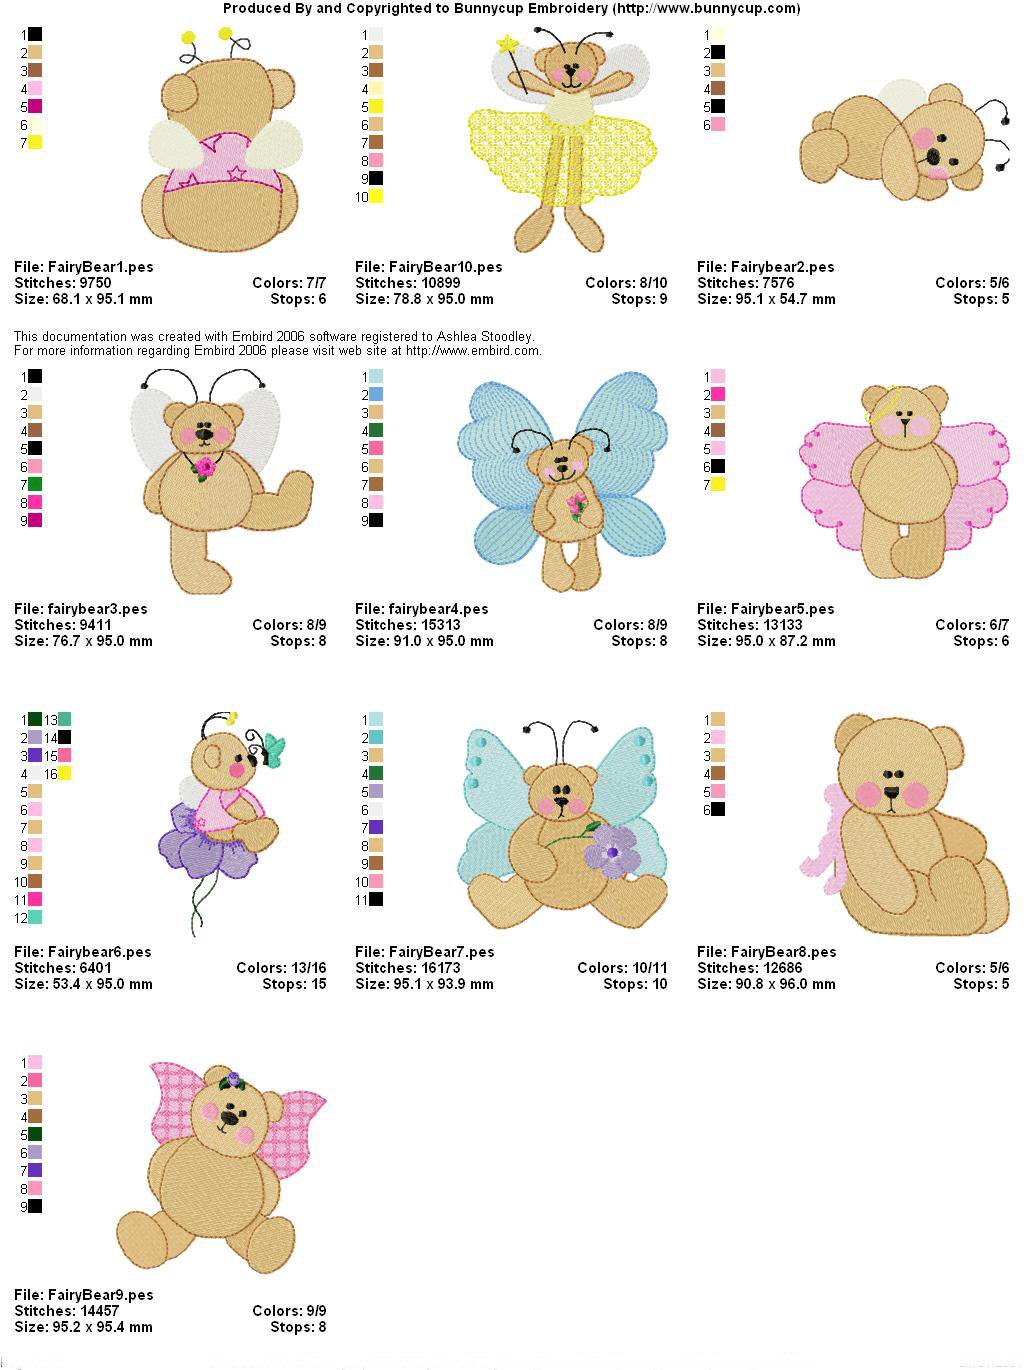 Teddy Bear Quilt - Embroidery industry resource center online